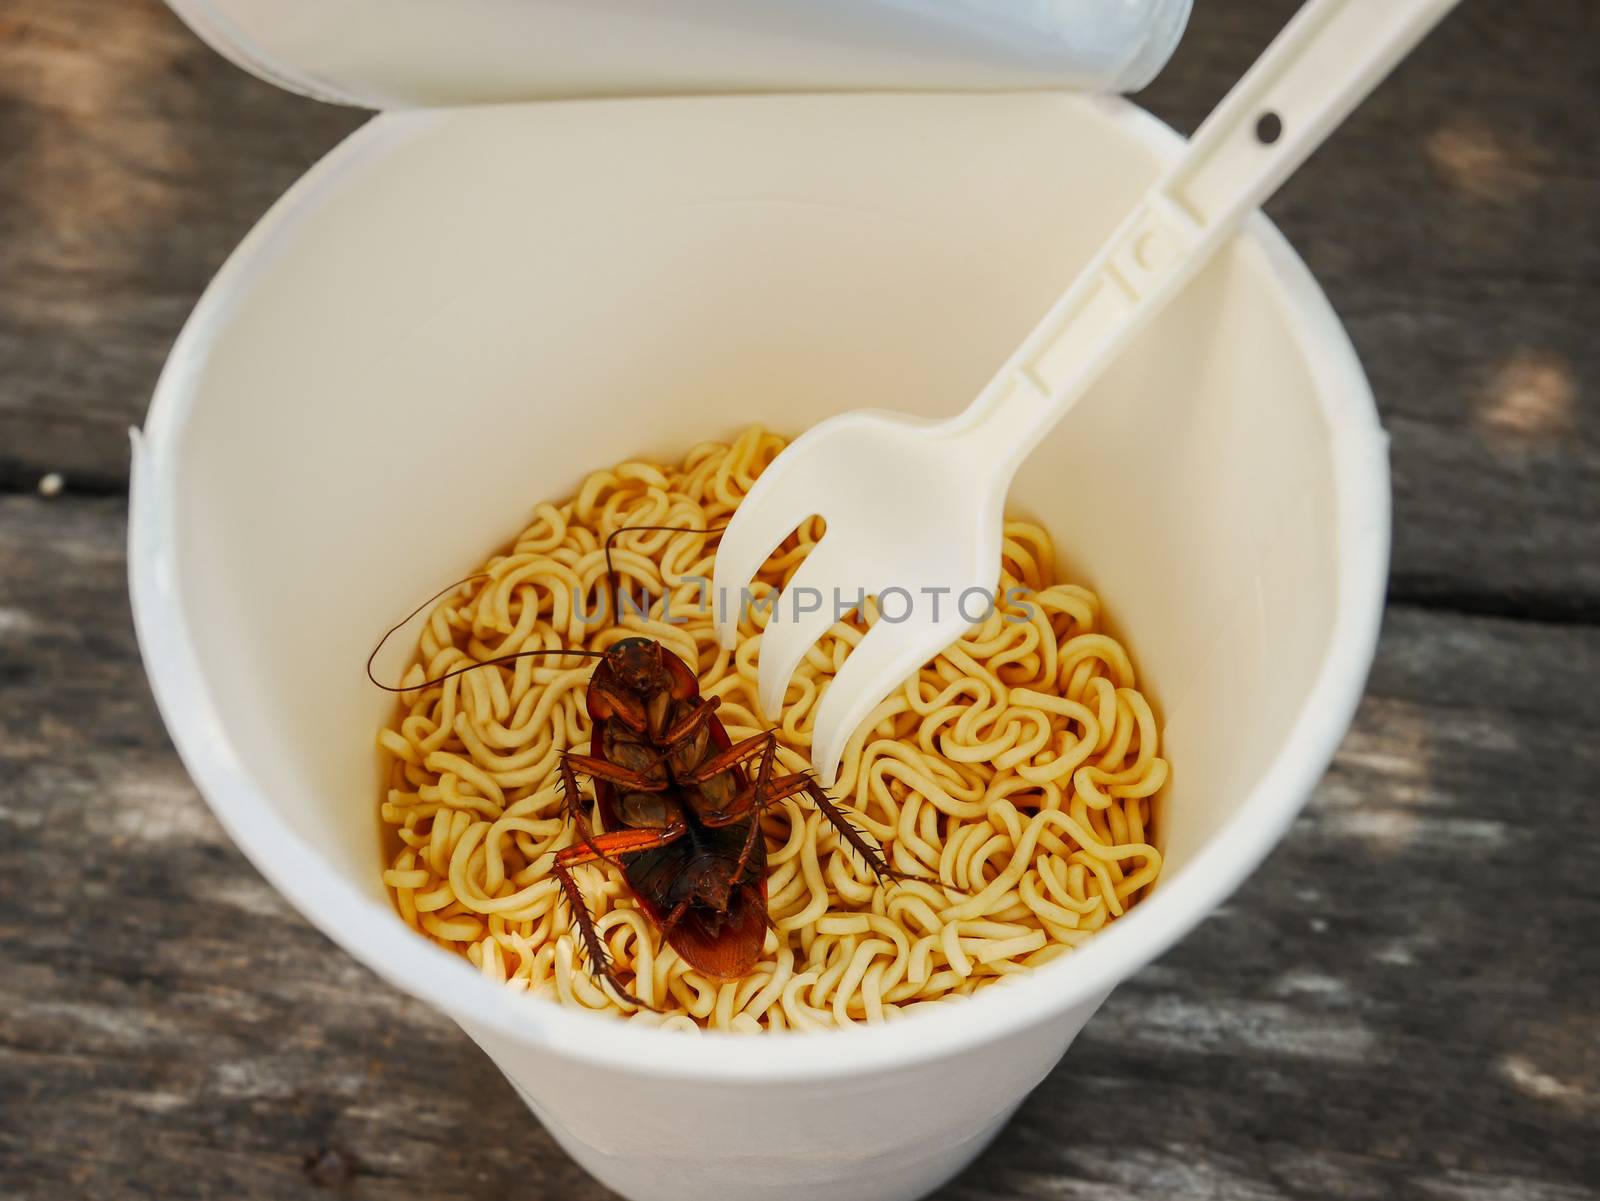 On cockroach dead in noodle cup